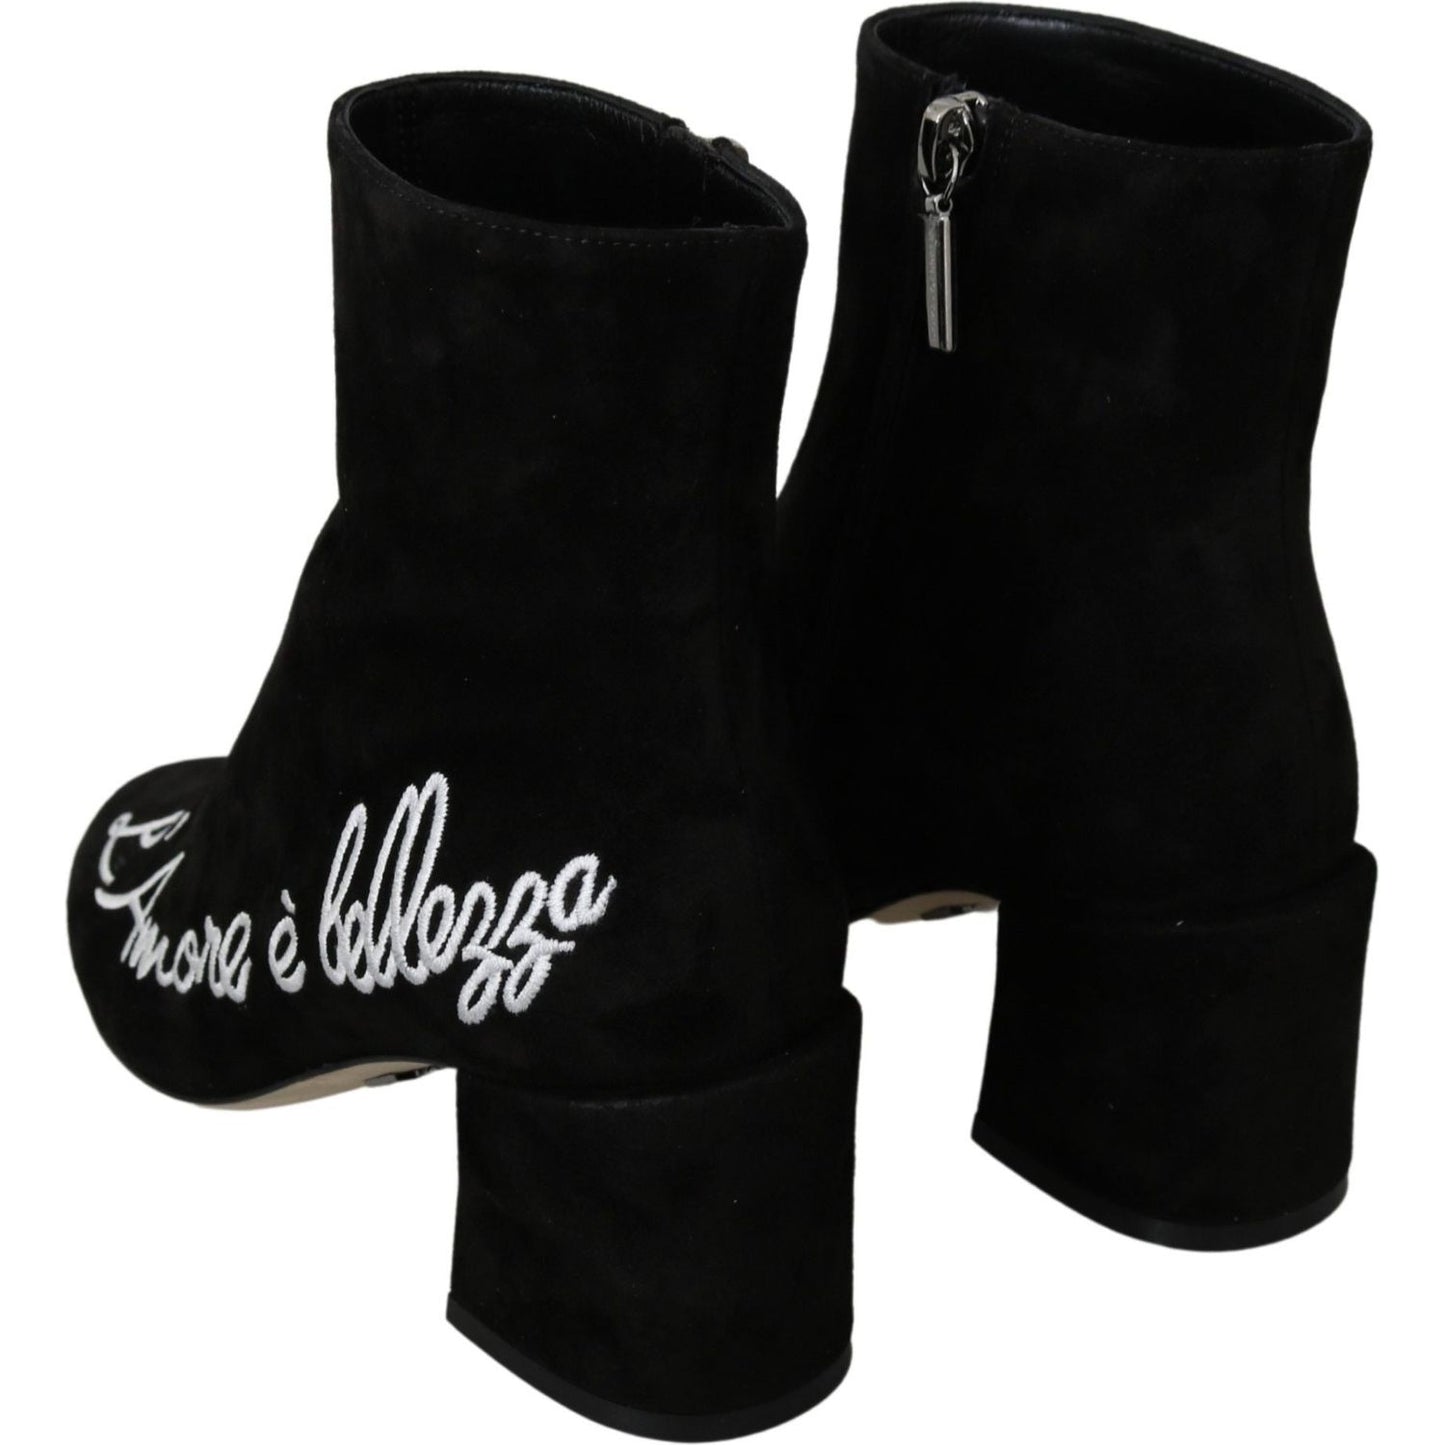 Dolce & Gabbana Chic Embroidered Ankle Boots black-suede-lamore-ebellezza-boots-shoes